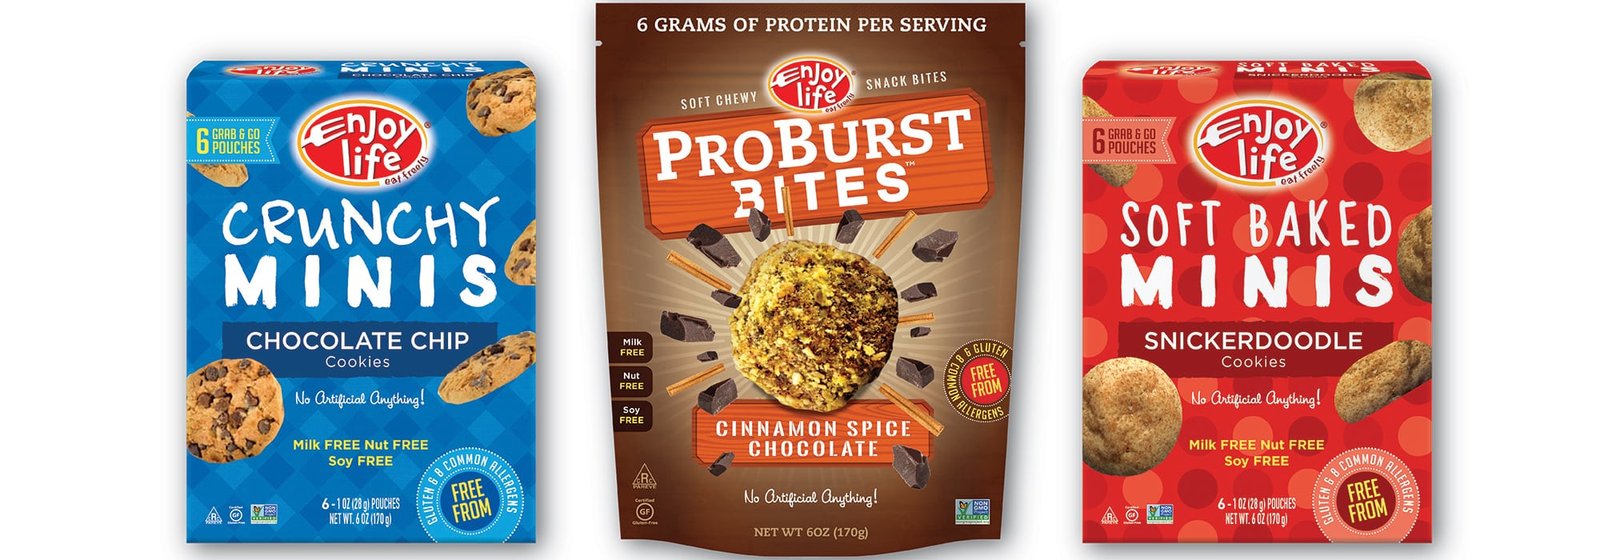 Enjoy Life Foods Debuts New Protein